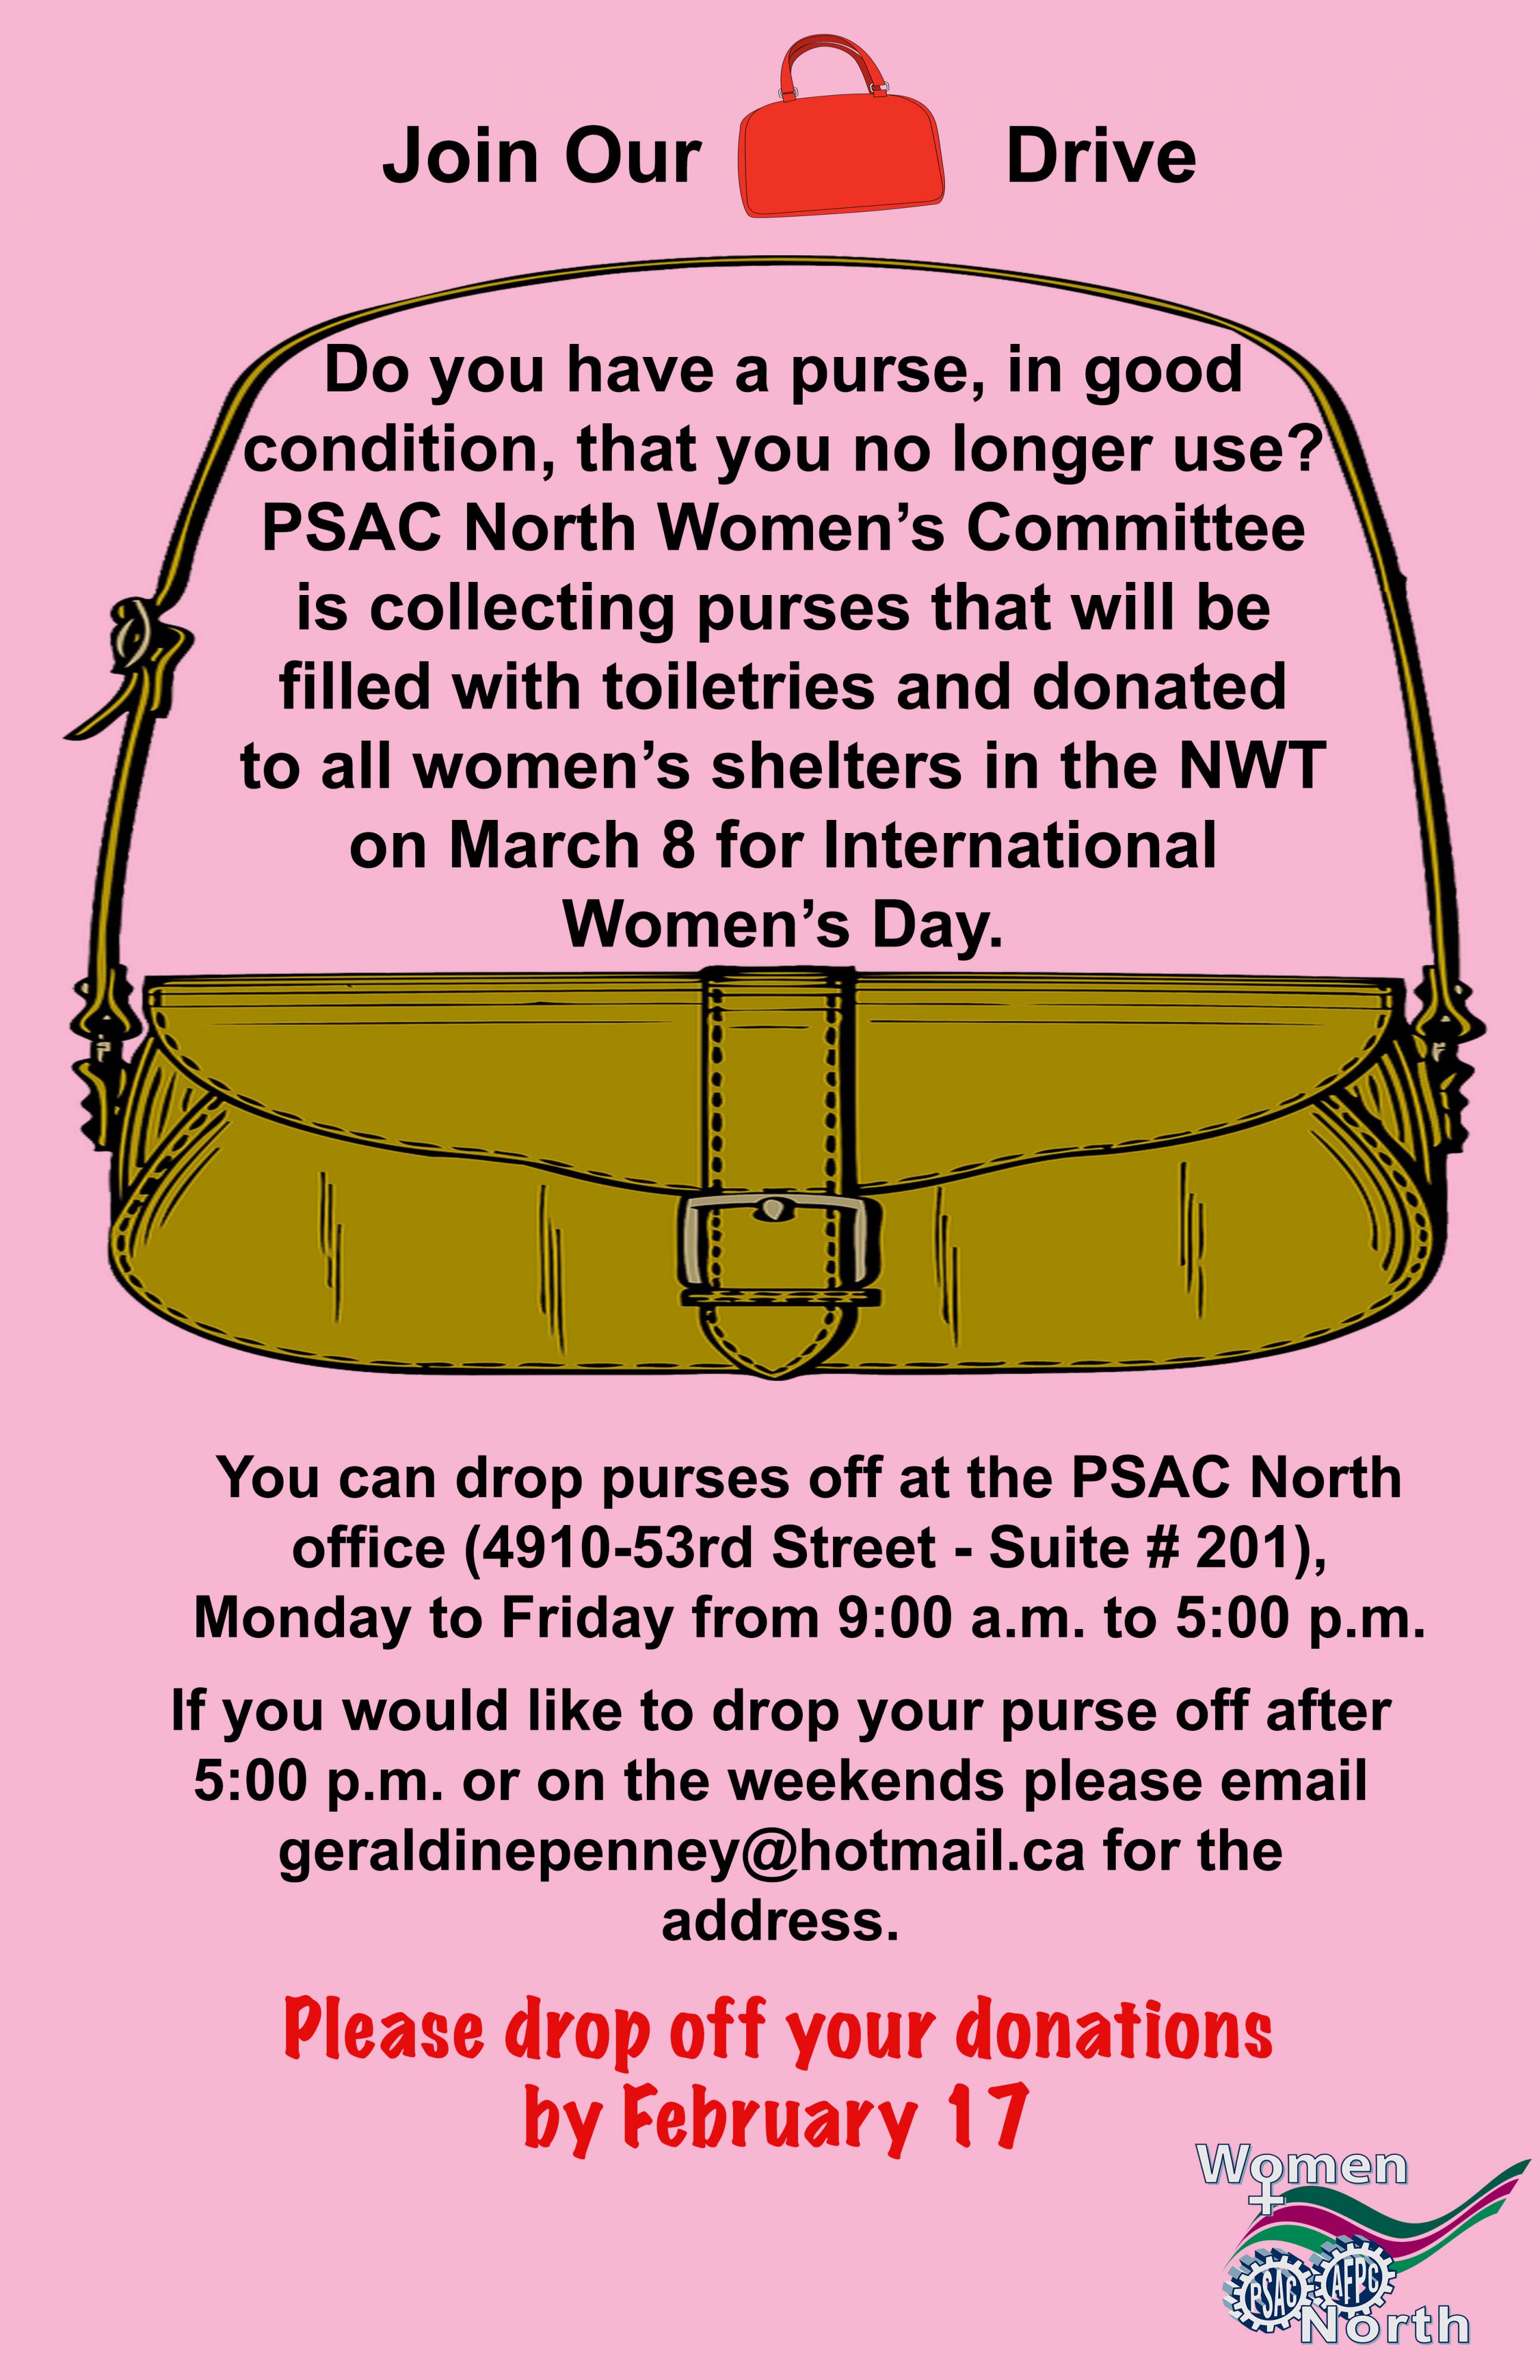 Do you have a purse, in good condition, that you no longer use? PSAC North NWT Women’s Committee is collecting purses that will be filled with toiletries and donated to all women’s shelters in the NWT on March 8 for International Women’s Day.  You can drop purses off at the PSAC North office (4910-53rd Street - Suite # 201), Monday to Friday from 9:00 a.m. to 5:00 p.m.  If you would like to drop your purse off after 5:00 p.m. or on the weekends please email geraldinepenney@hotmail.ca for the address.